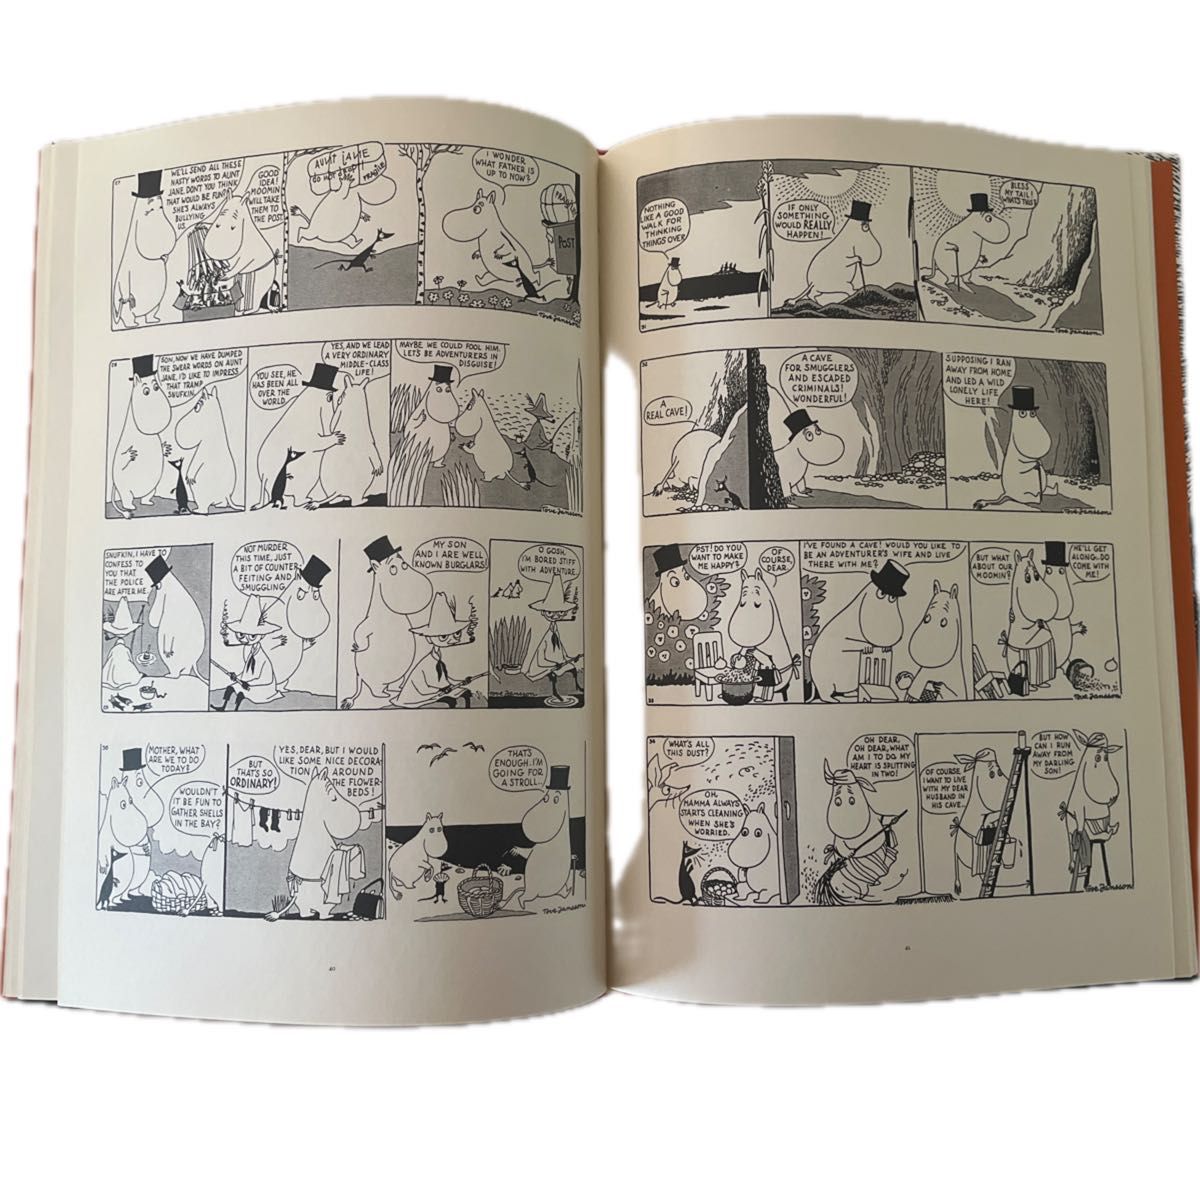 ◆Moomin◆ムーミン◆The Complete Tove Jansson Comic Strip◆コミック◆洋書◆